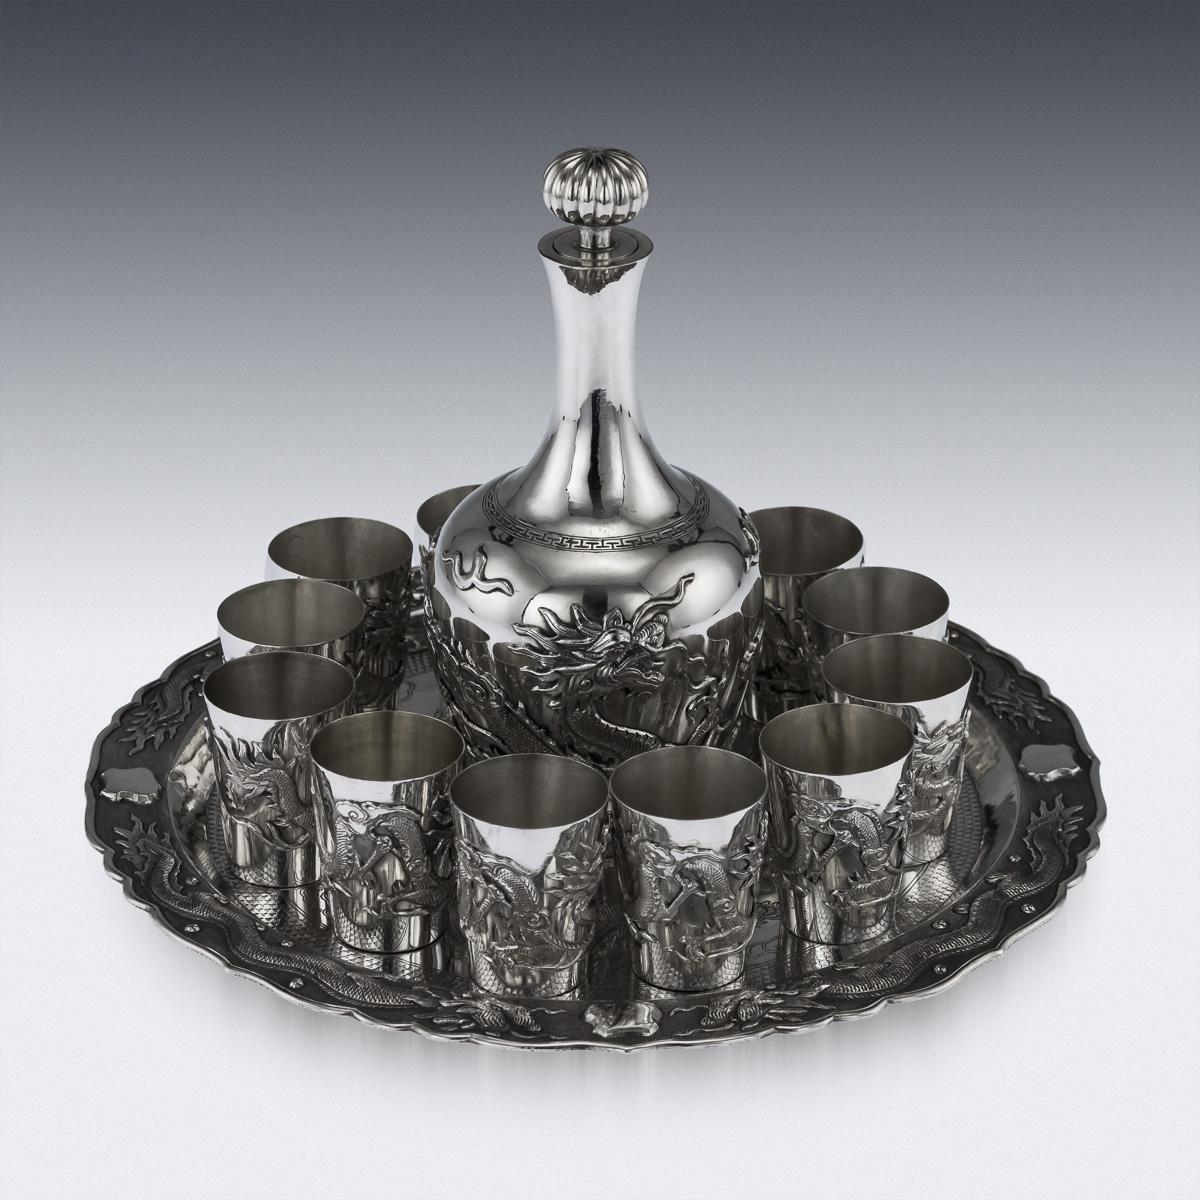 Antique early 20th century Chinese solid silver sake drinking set, comprising of a lidded bottle, twelve beakers and a tray. Each piece is very decorative, bottle applied with a flying dragons and mounted with a removable stopper, the beakers are